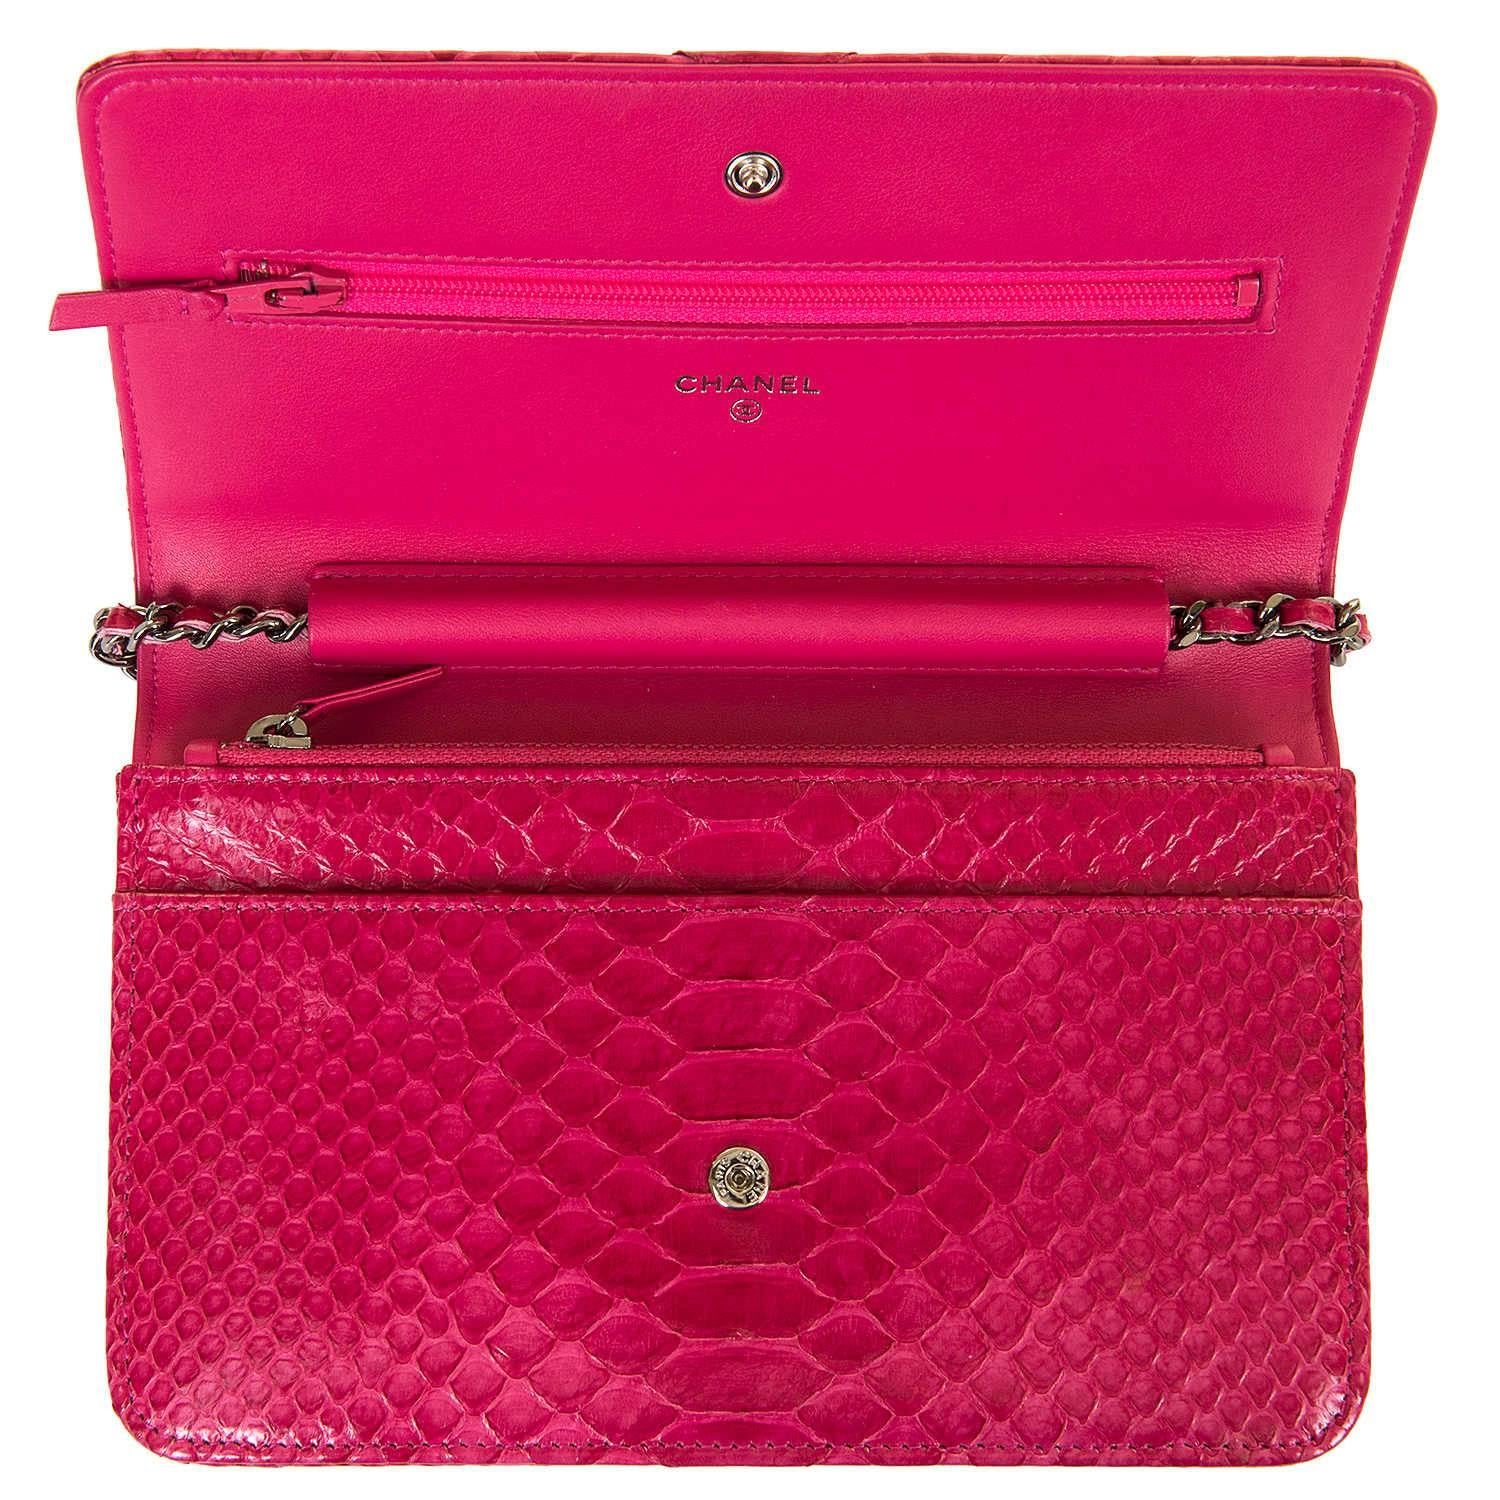 Red SO SO RARE Chanel 'Tres Chic' WOC Bag in Fushia Pink Python with SHW - Pristine 